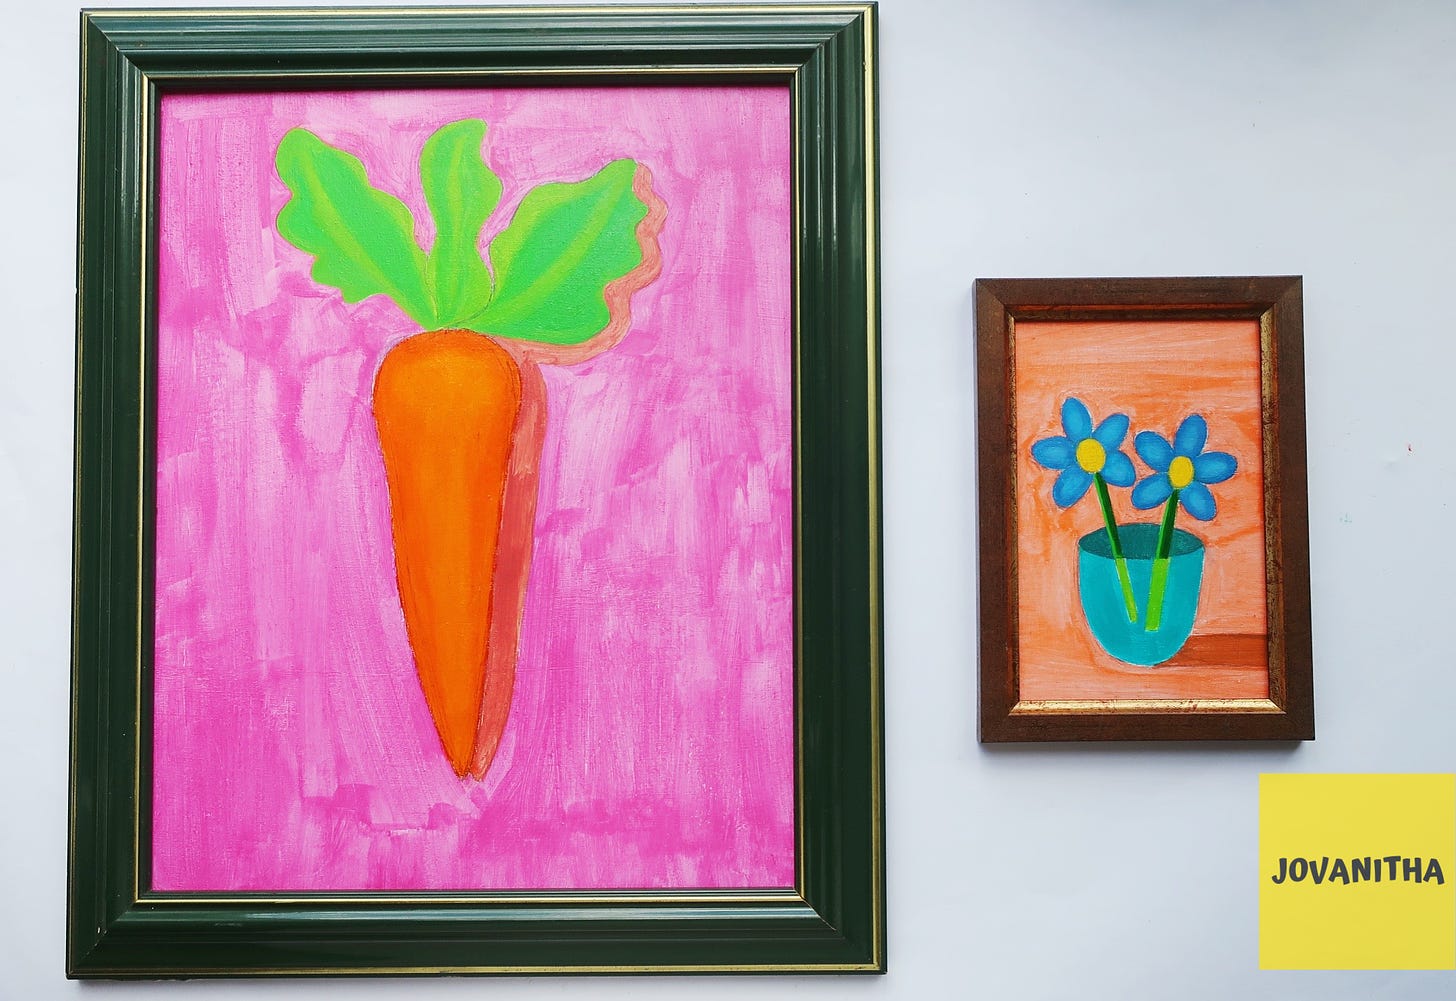 An orange carrot on a pink background and blue forget-me-not flowers on an orange background in vintage frames